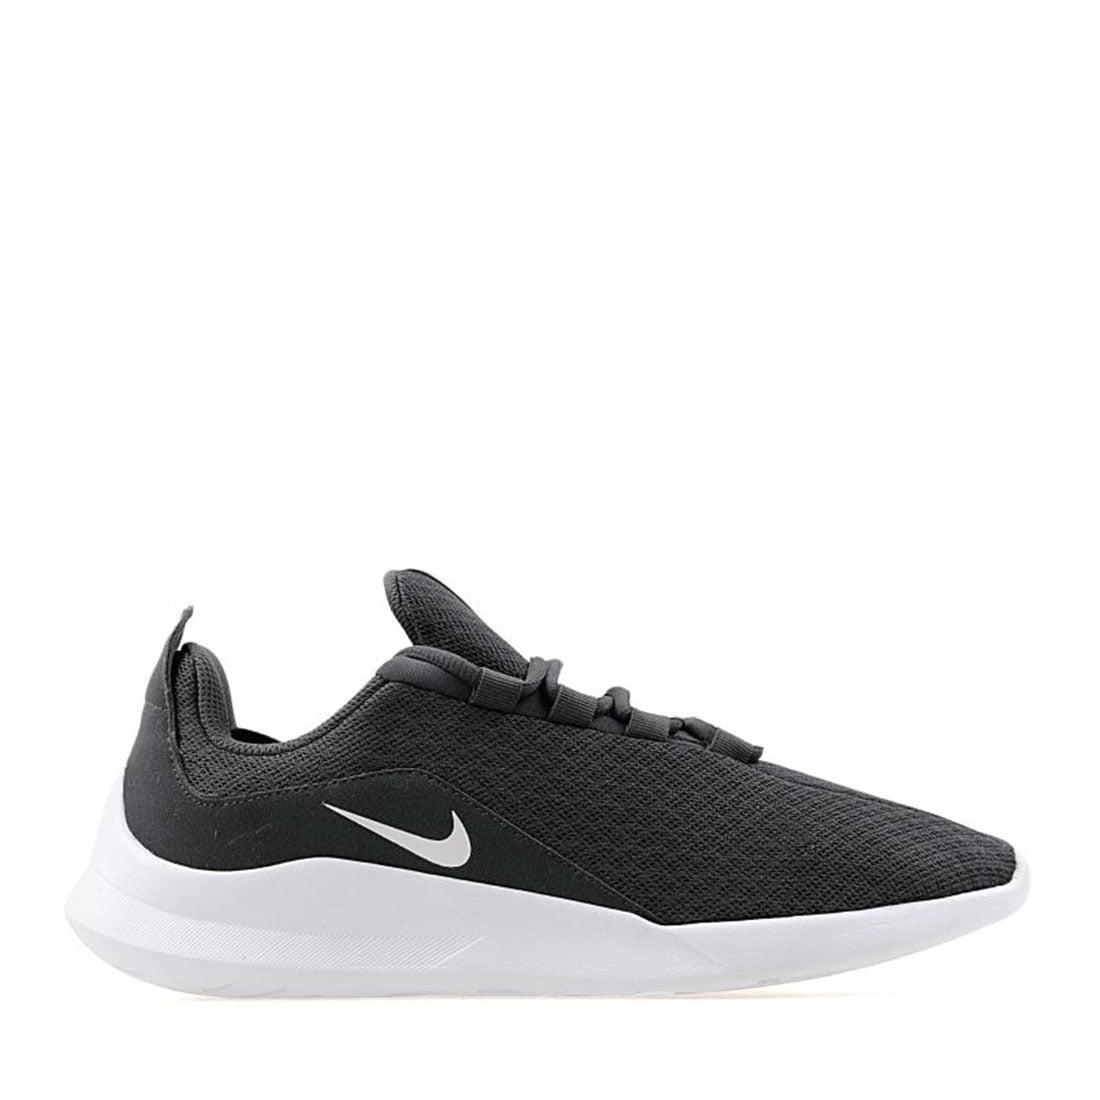 NIKE Viale Men/Adult size Casual AA2181-011 Anthracite/White - Infrared -